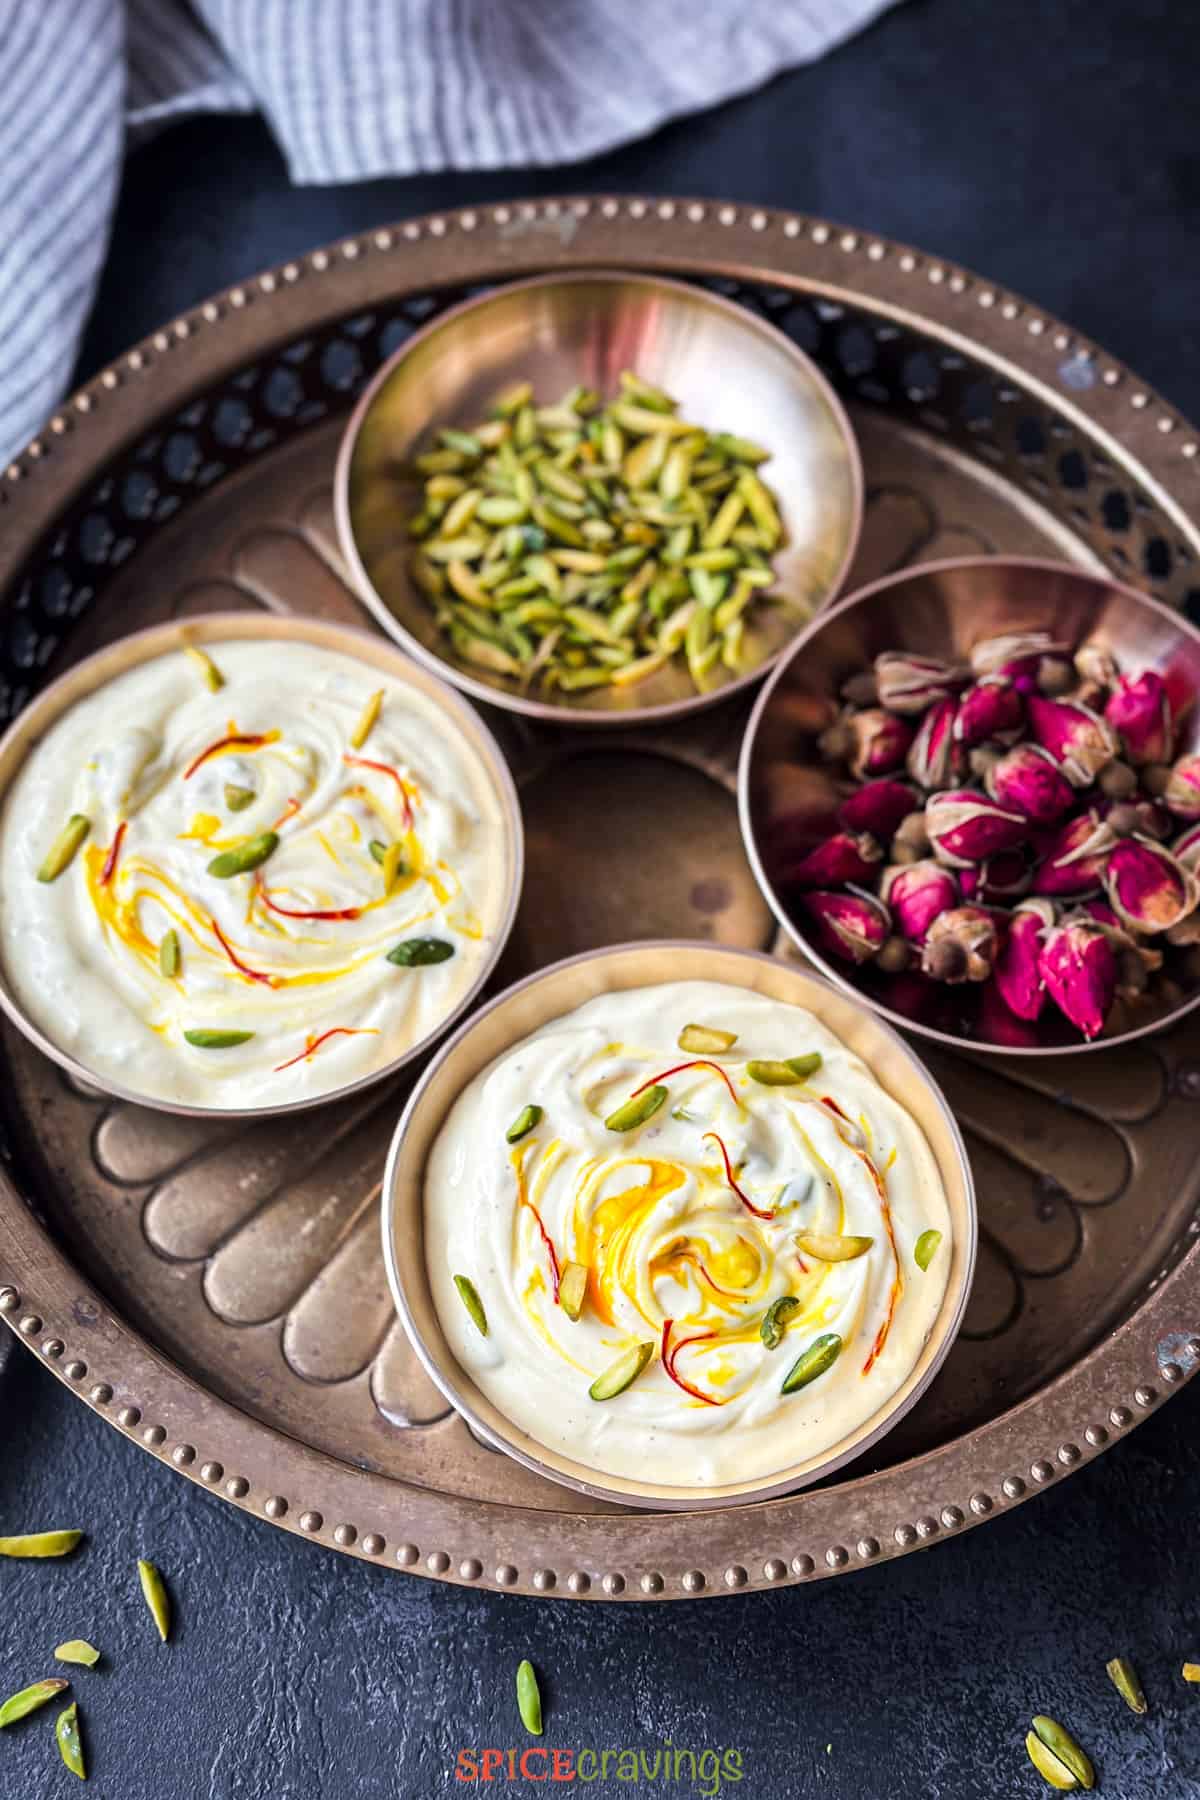 4 copper bowls, 2 with shrikhand, 1 with rose buds, and the 4th with sliced pistachios